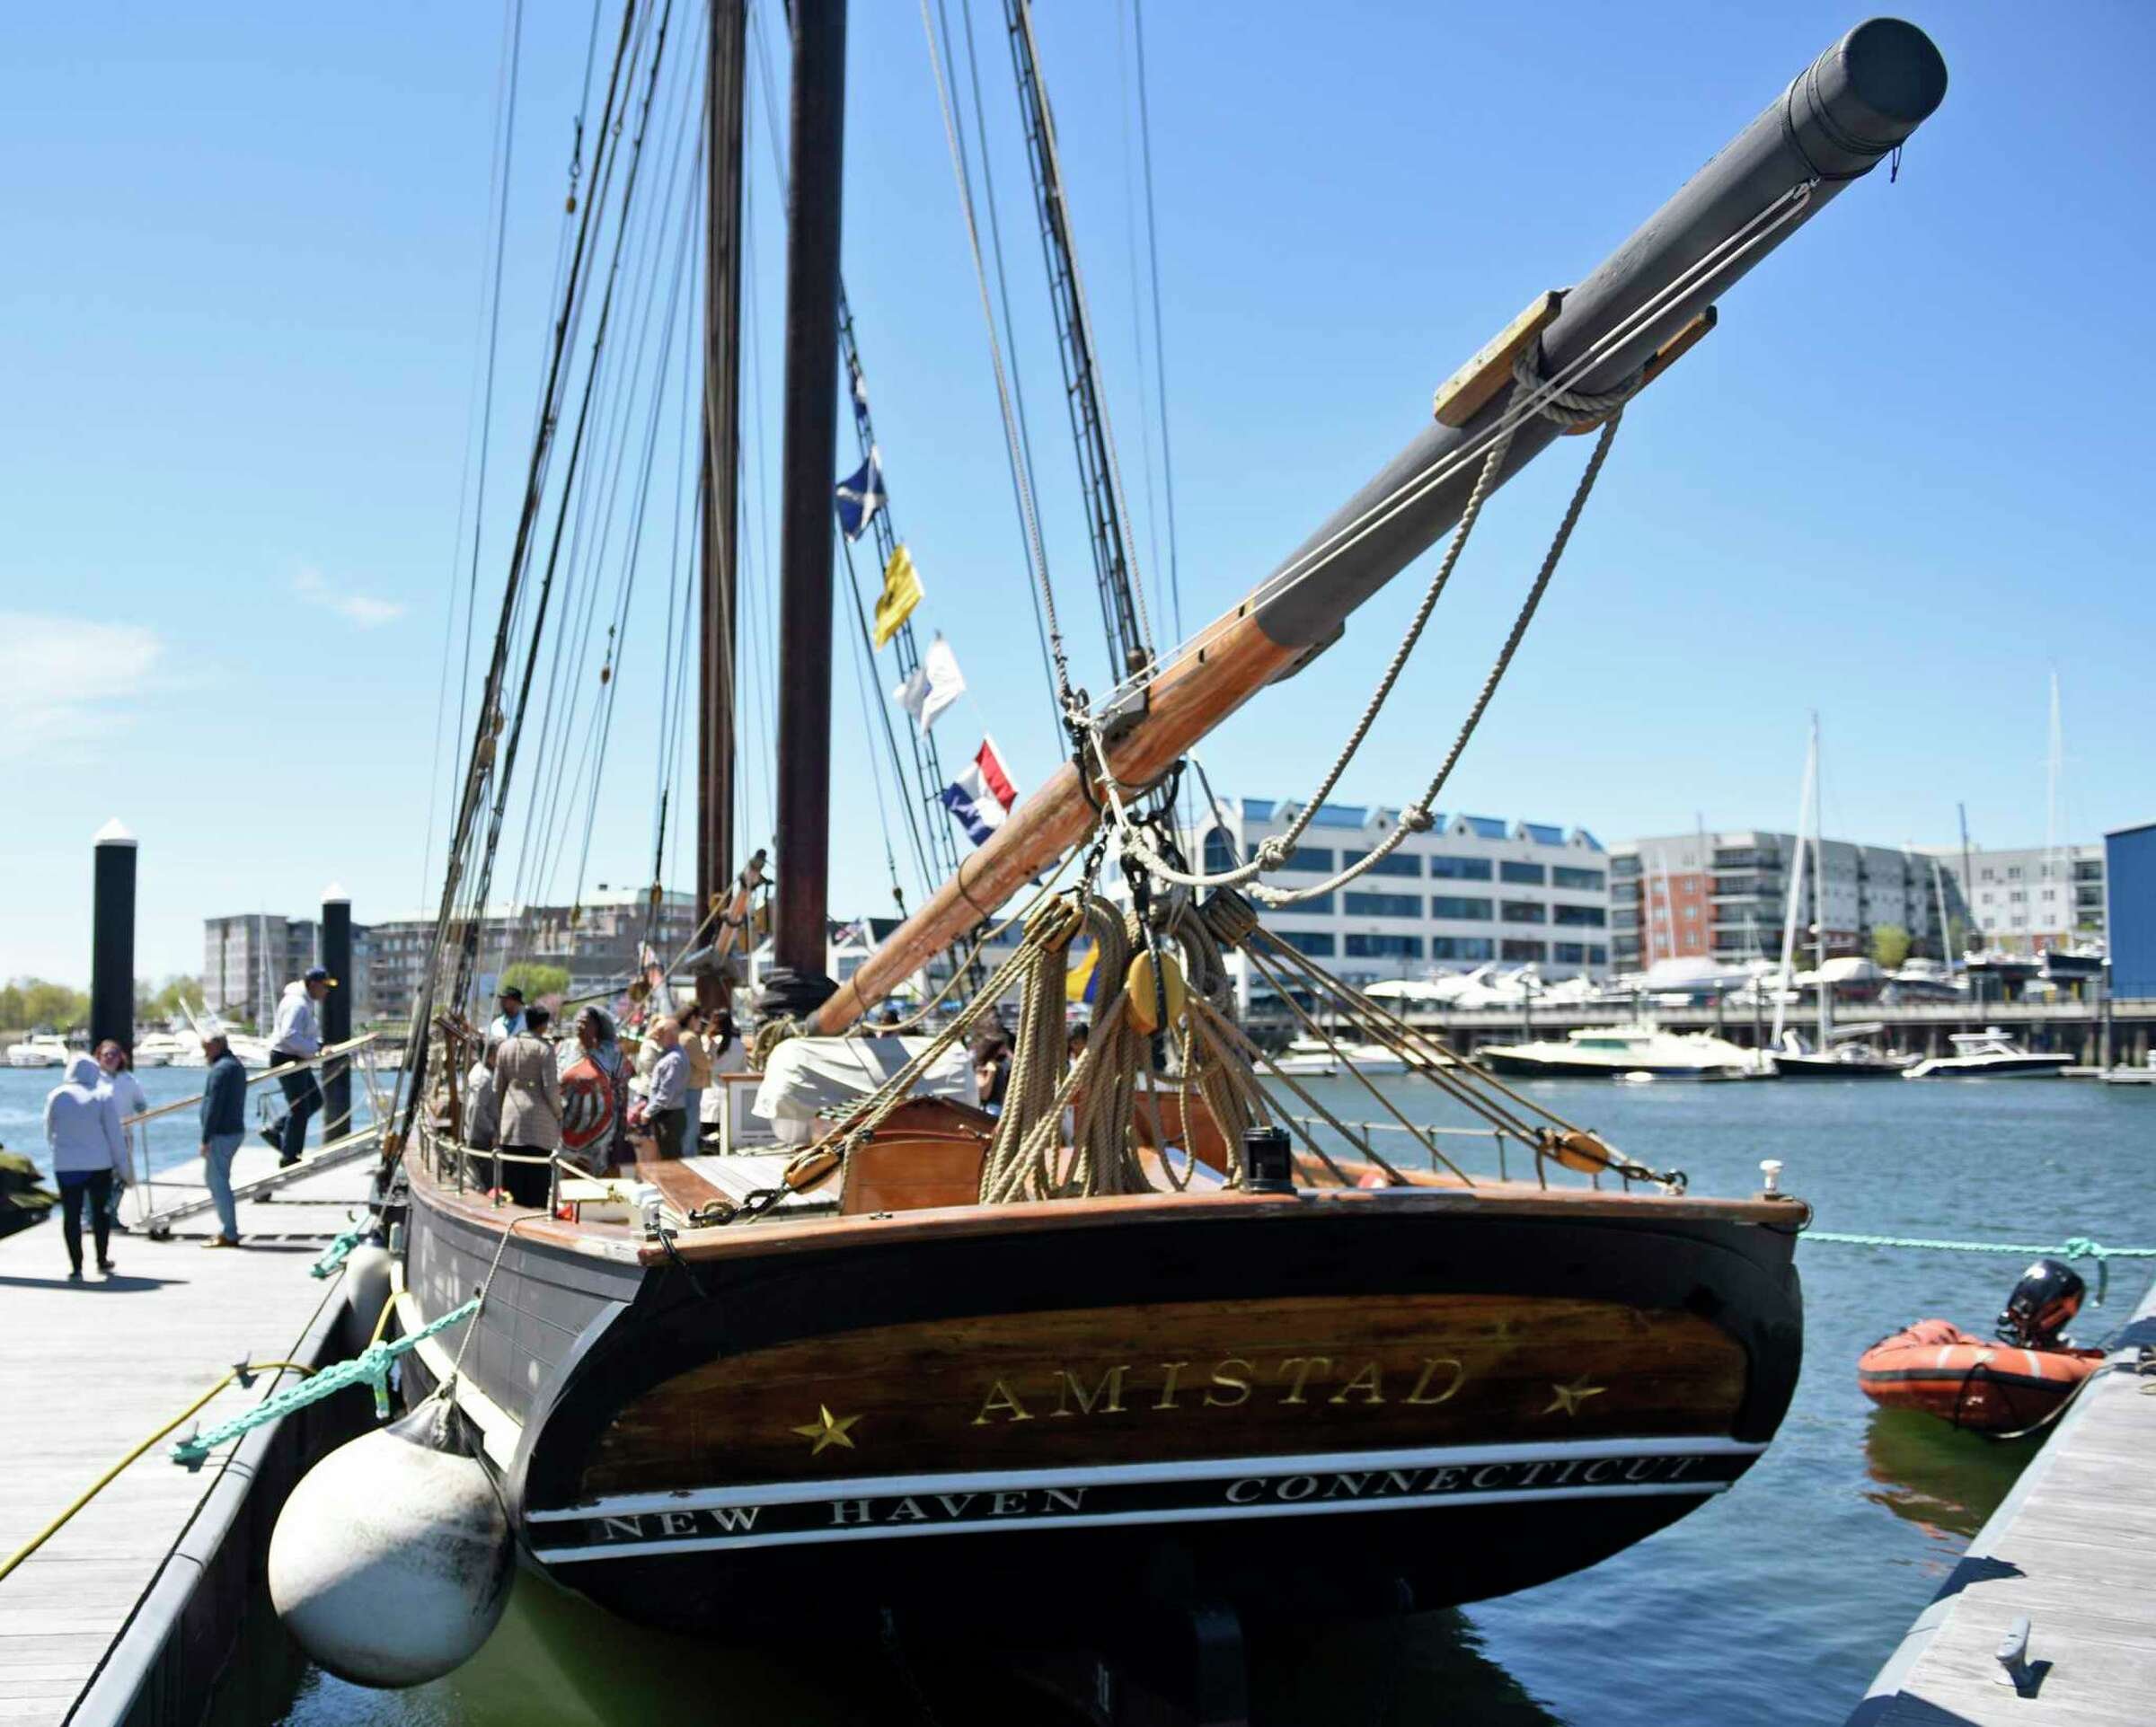  Students board a reproduction of the Amistad slave ship docked at Harbor Point in Stamford, Conn. Monday, May 9, 2022. Eighth grade students toured the ship to kick off the new partnership between Stamford Public Schools and Discovering Amistad. Stu